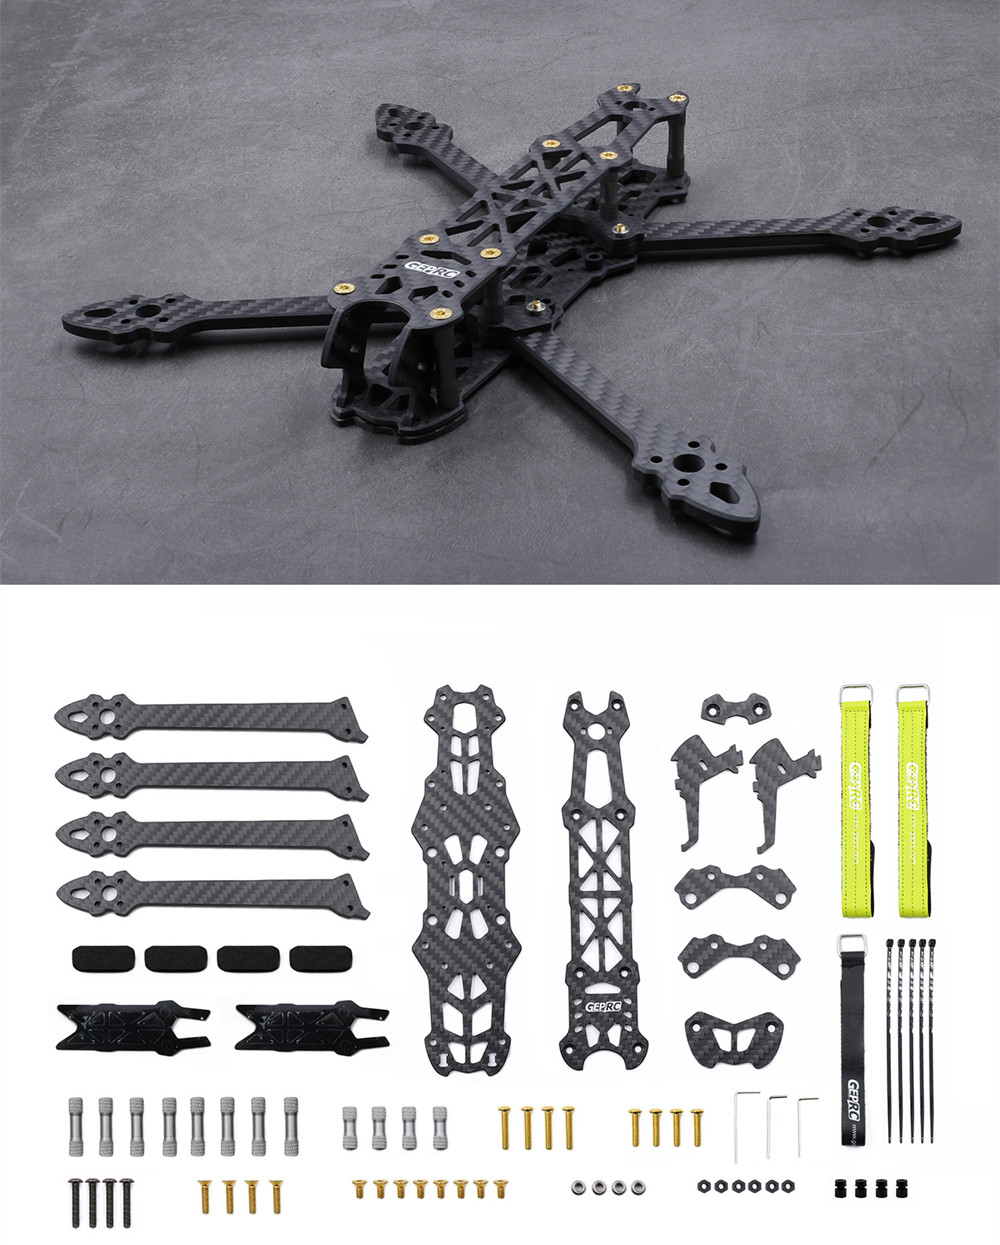 Geprc MARK4 225mm 5 Inch / 260mm 6 Inch / 295mm 7 Inch Frame Kit for RC Drone FPV Racing 49